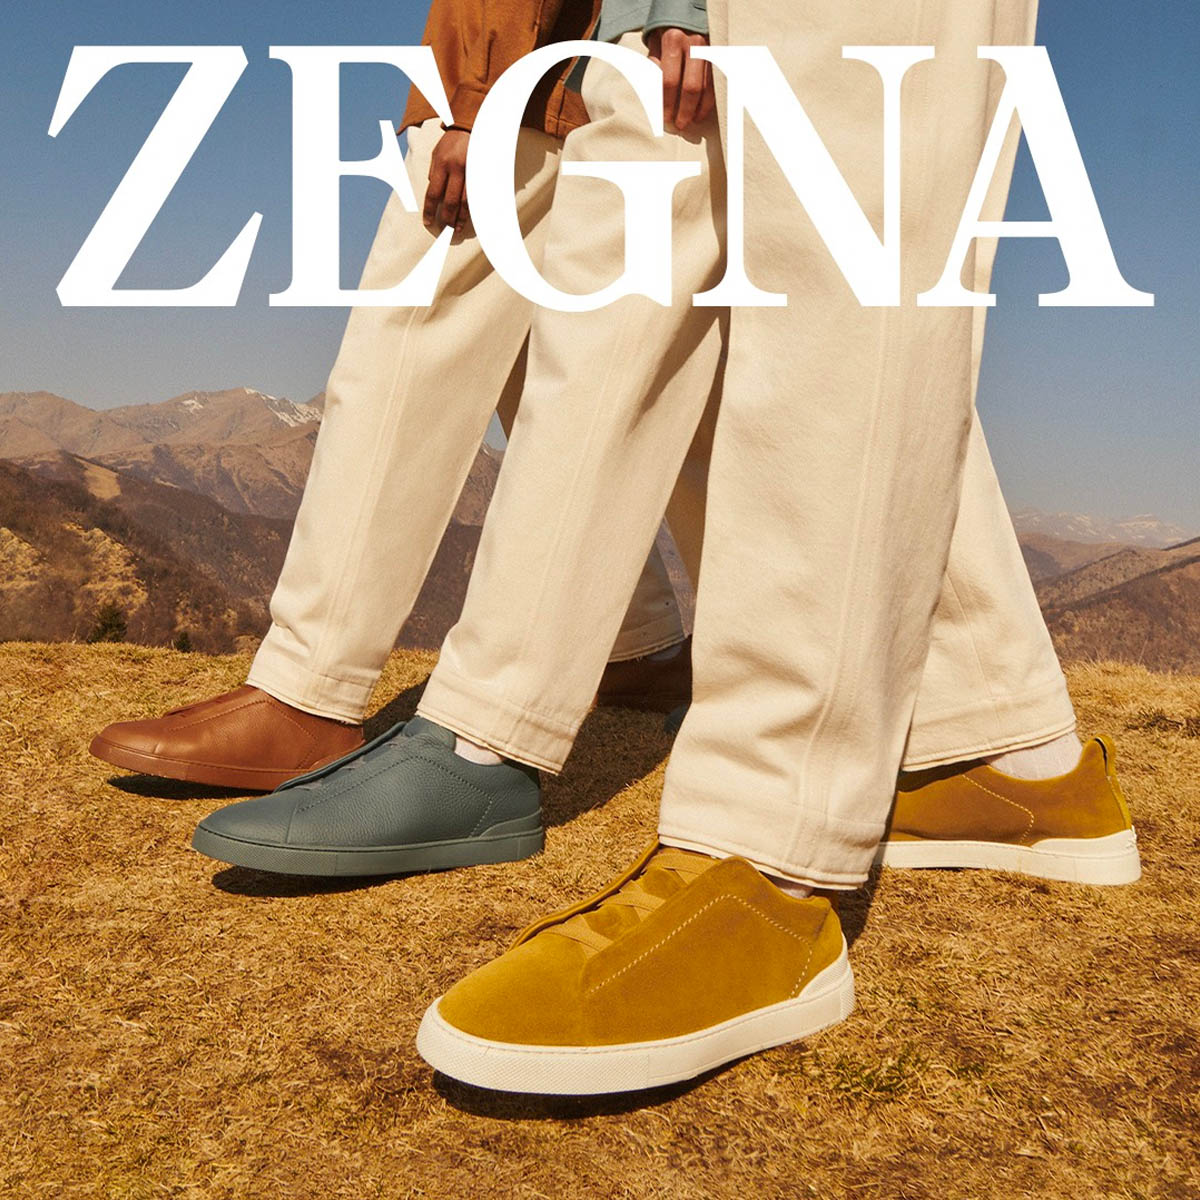 Zegna Collection